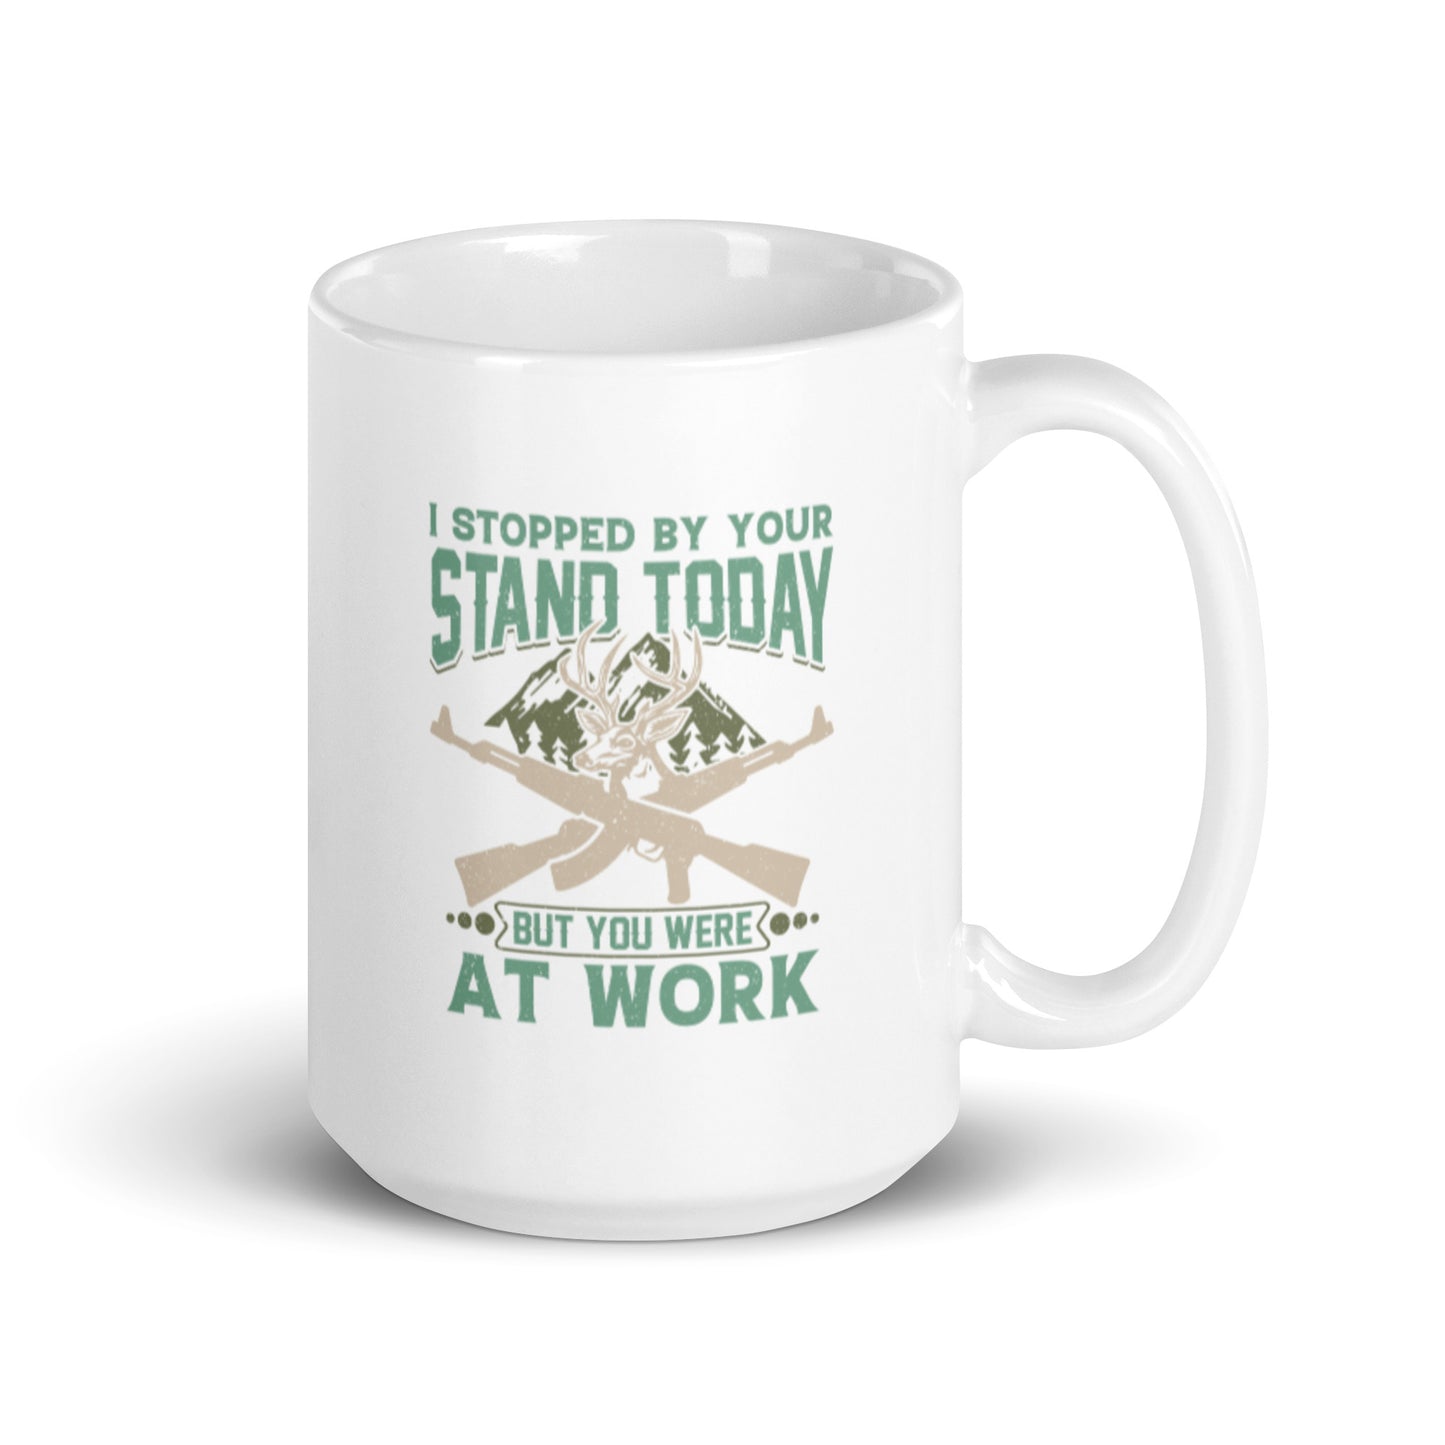 I Stopped by Your Stand Today White glossy mug